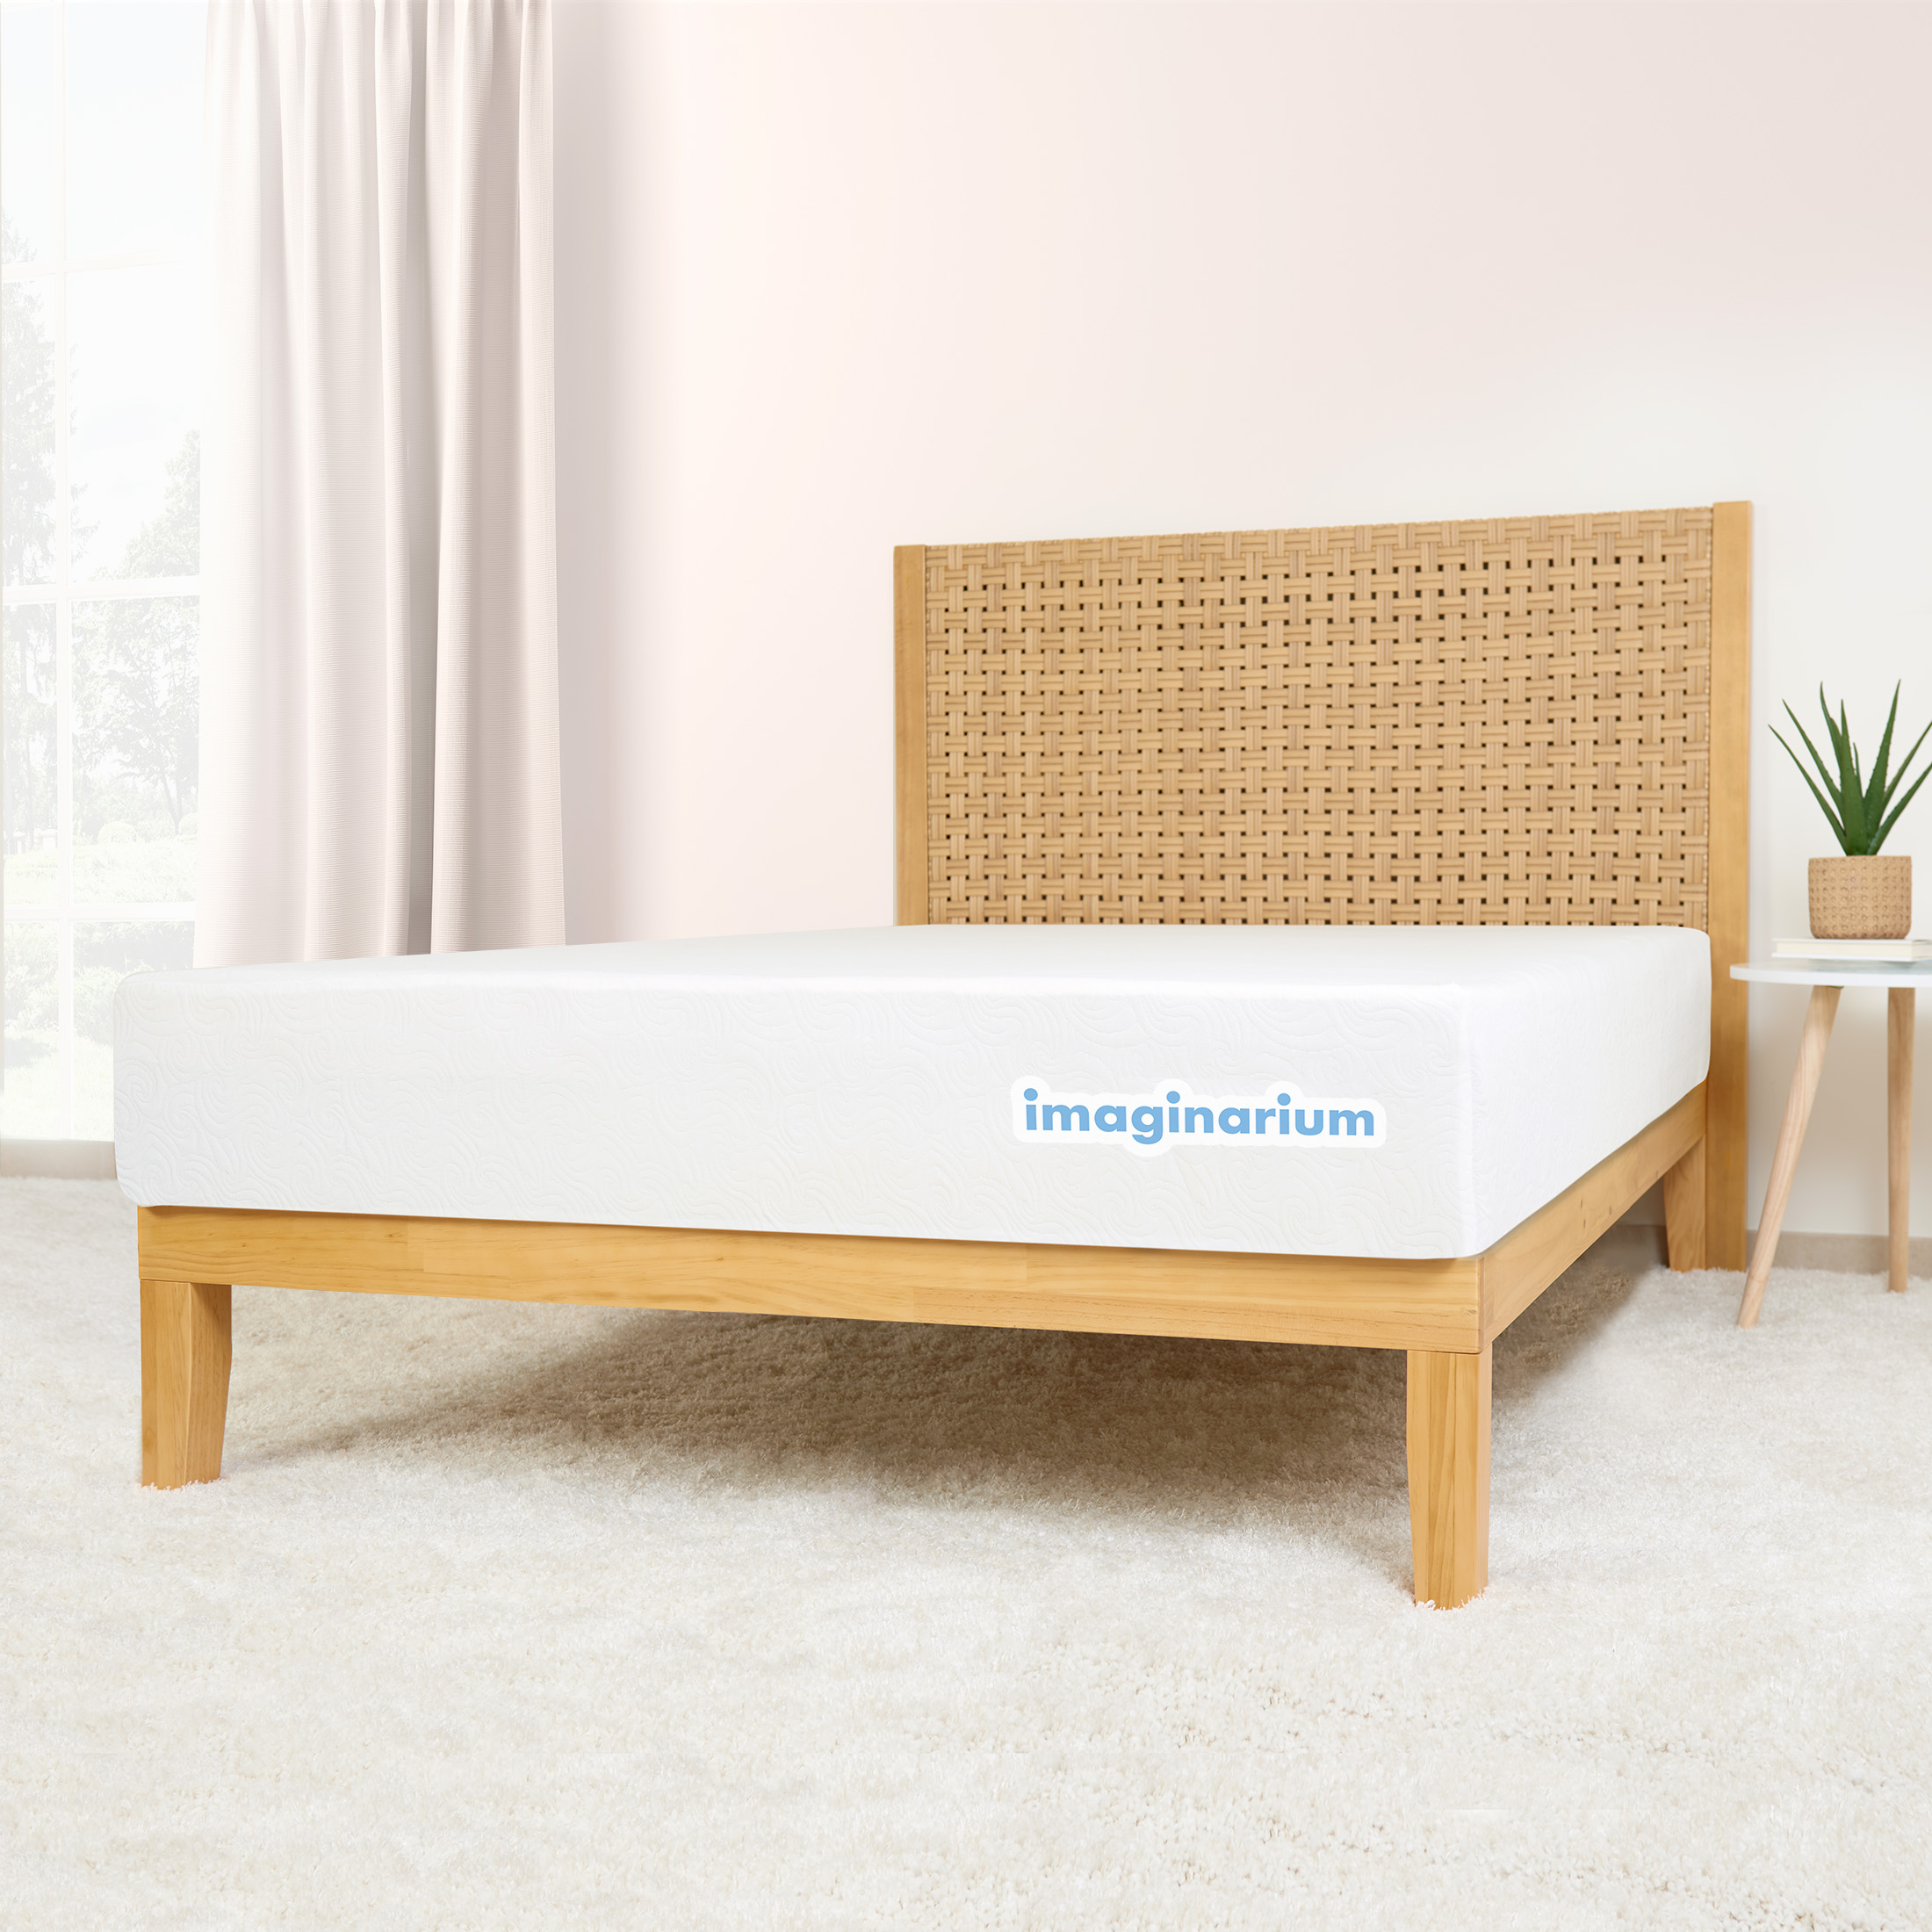 Imaginarium 10" Hybrid of Memory Foam and Coils Mattress with Antimicrobial Treated Cover, King - image 5 of 6